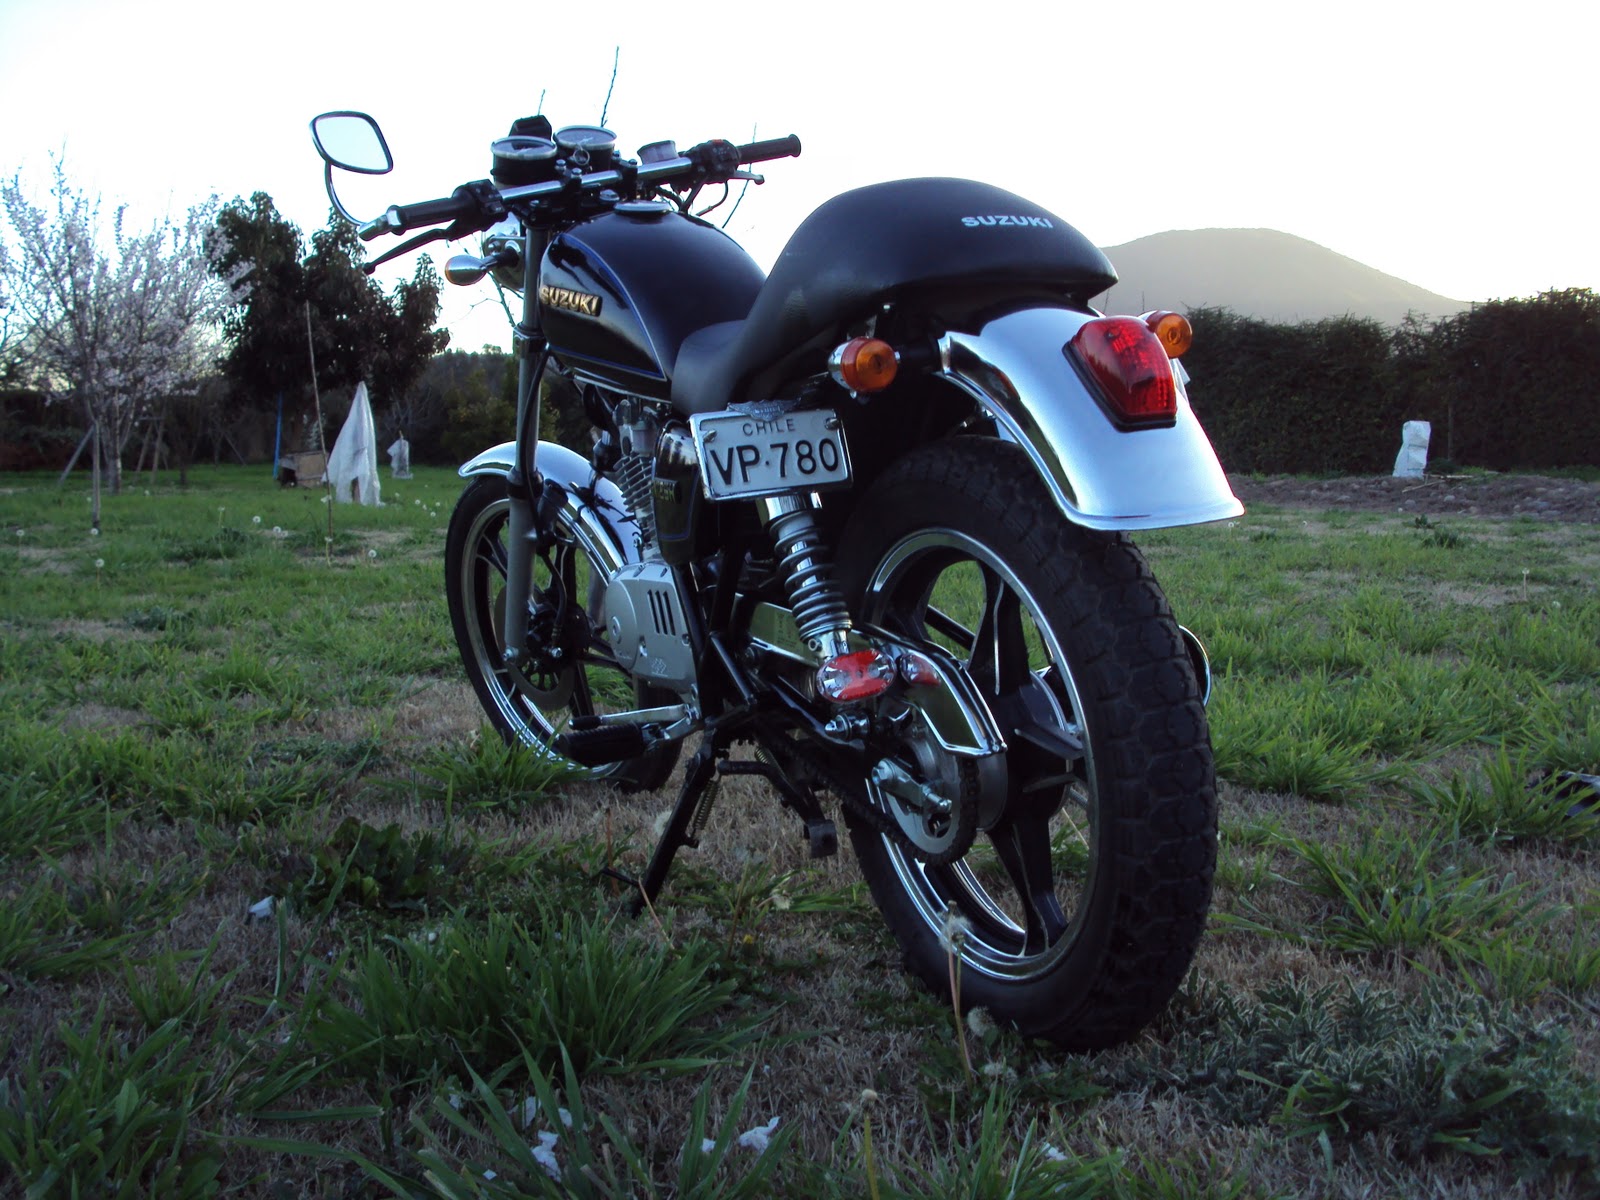 Suzuki Gn 125 Cafe Racer Chile | Reviewmotors.co